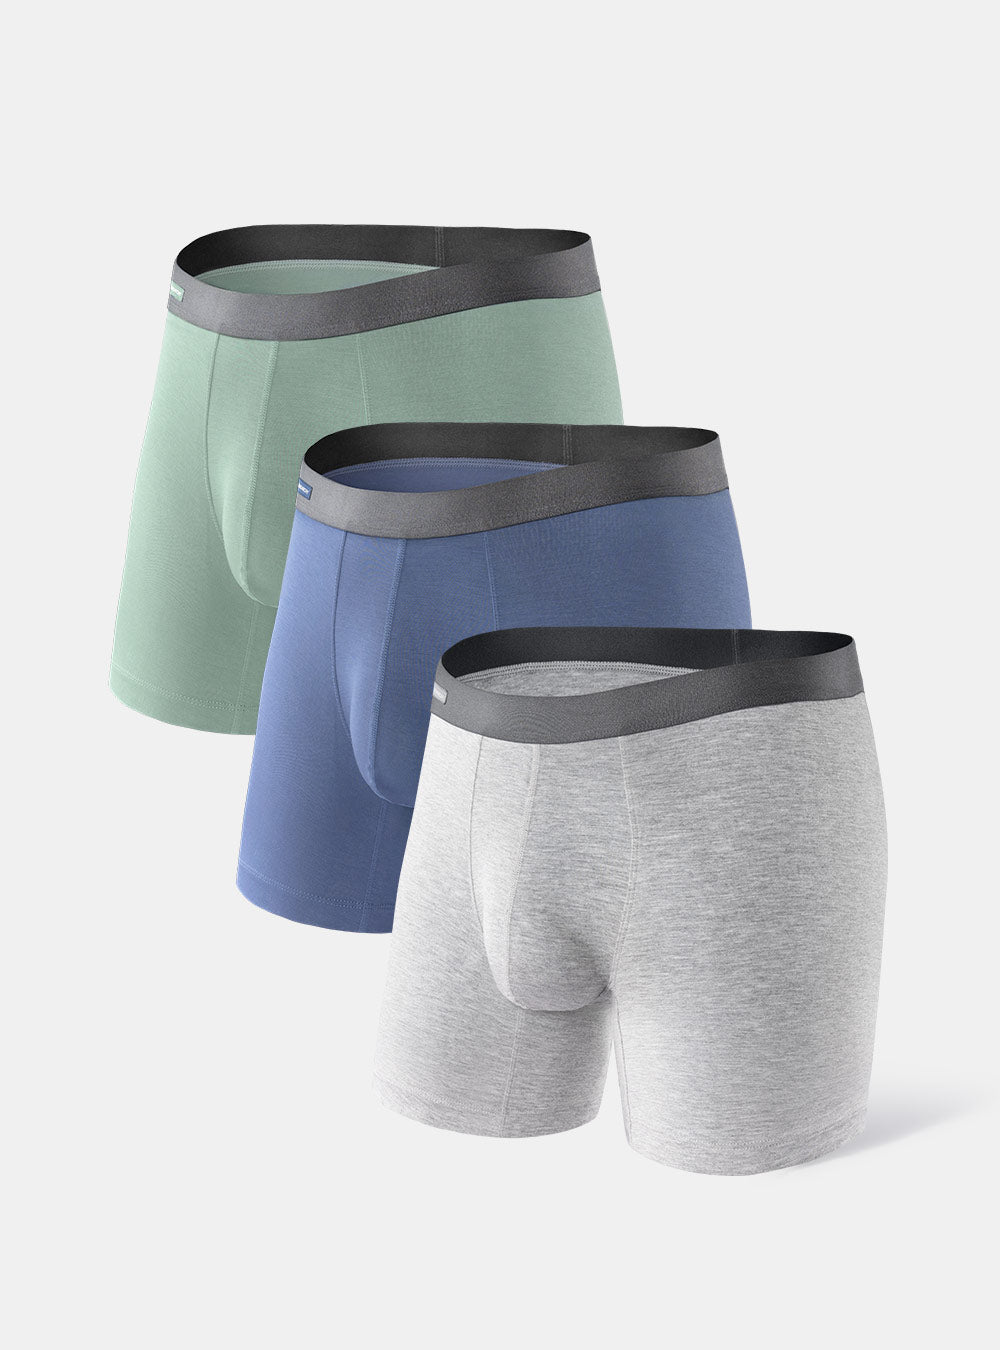 62 Selling Men's Underwear Images, Stock Photos, 3D objects